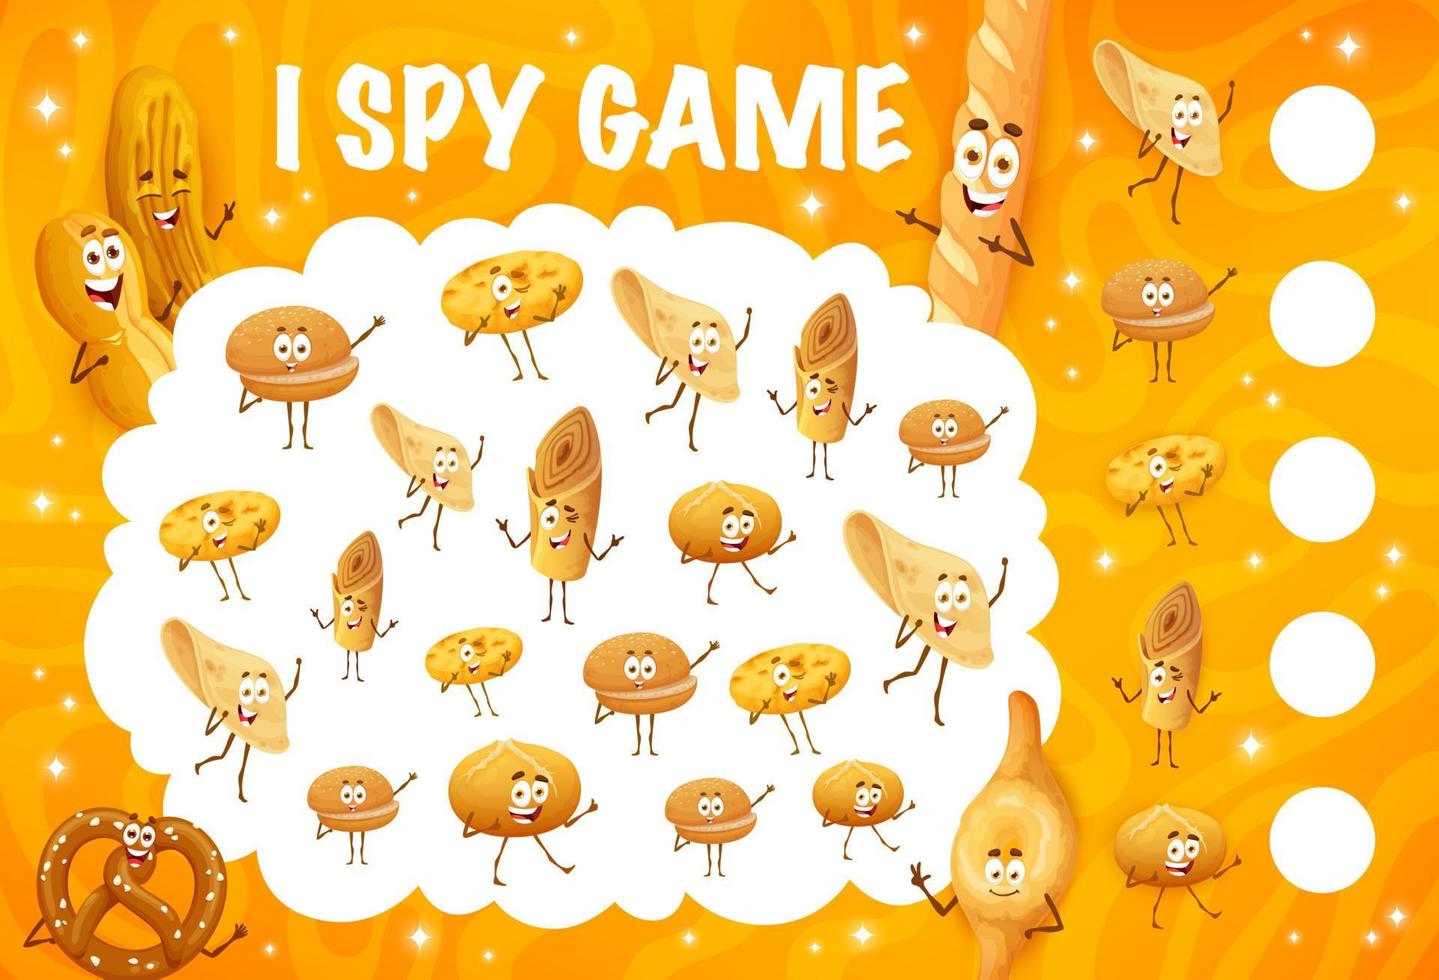 I spy game with cartoon bakery bread characters vector